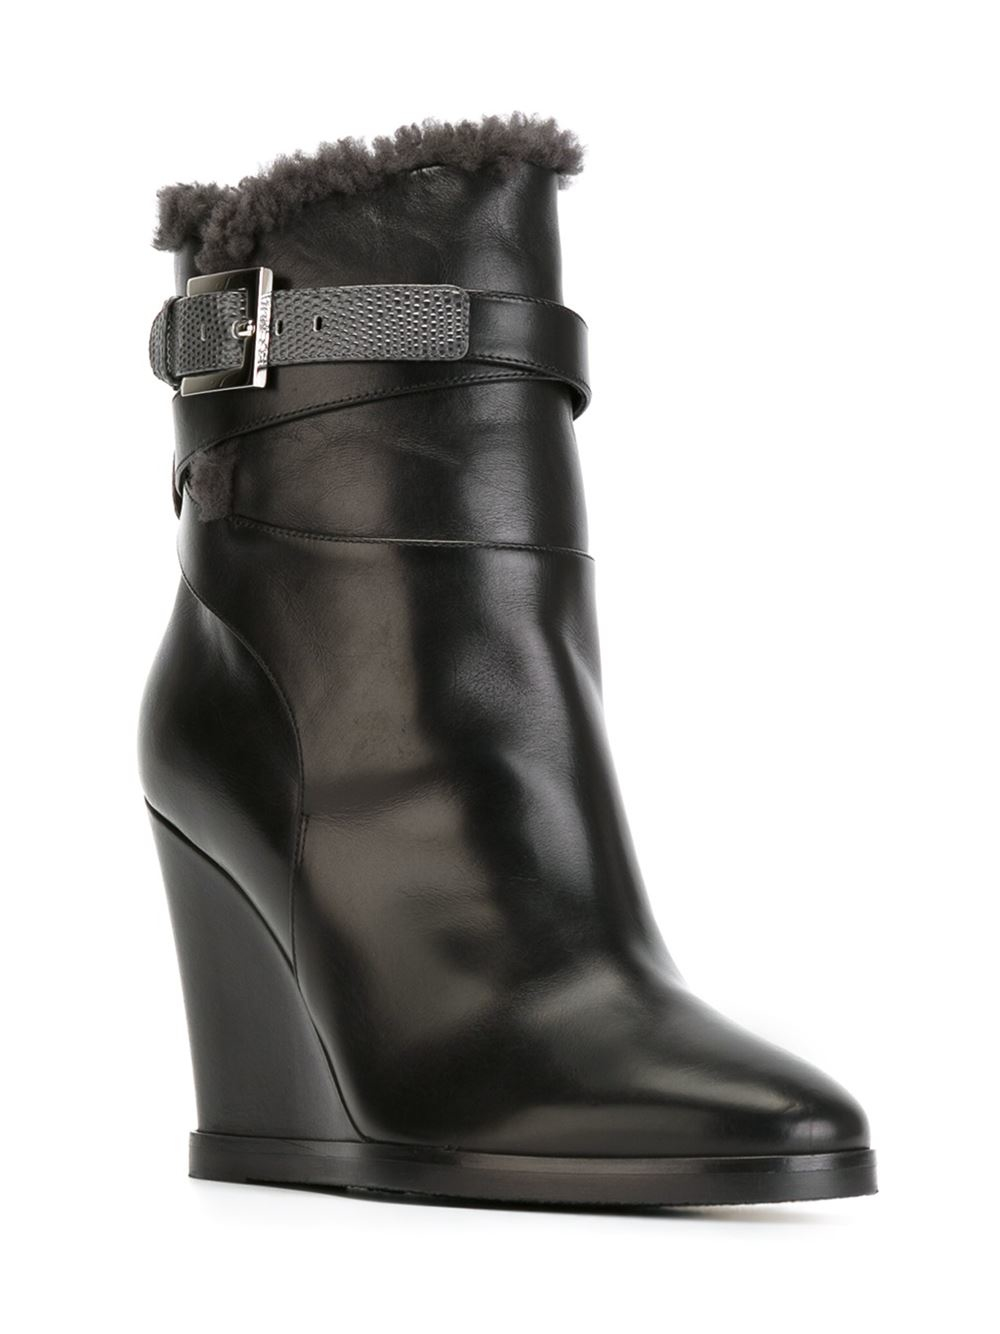 Fendi Leather Wedge Boots in Black - Lyst